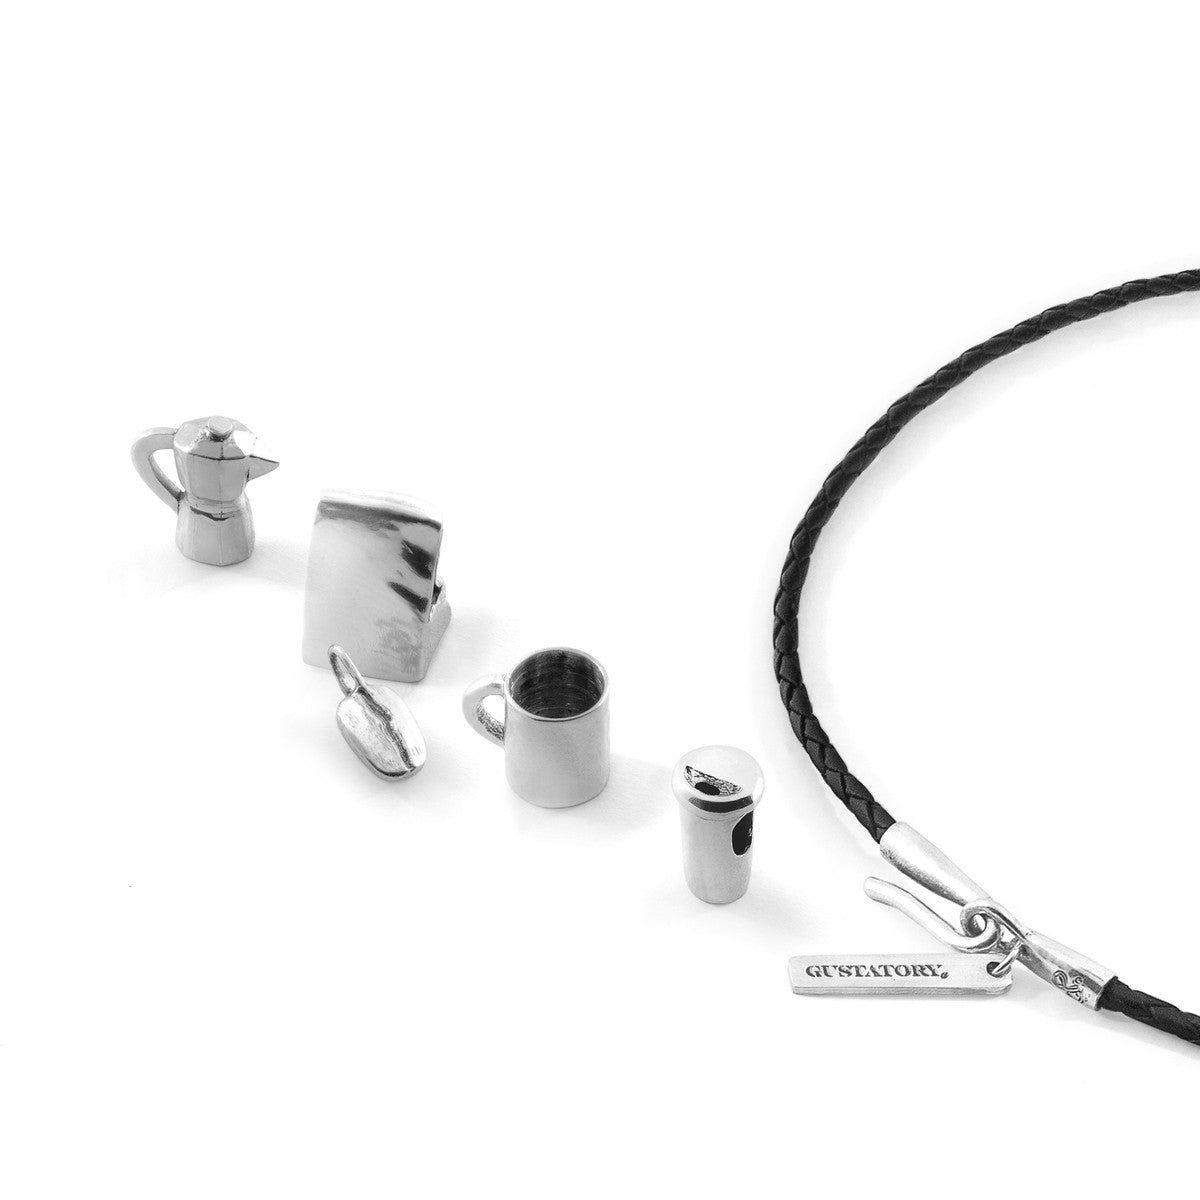 Midnight Black GUSTATORY Coffee Bean Silver and Braided Leather Bracelet